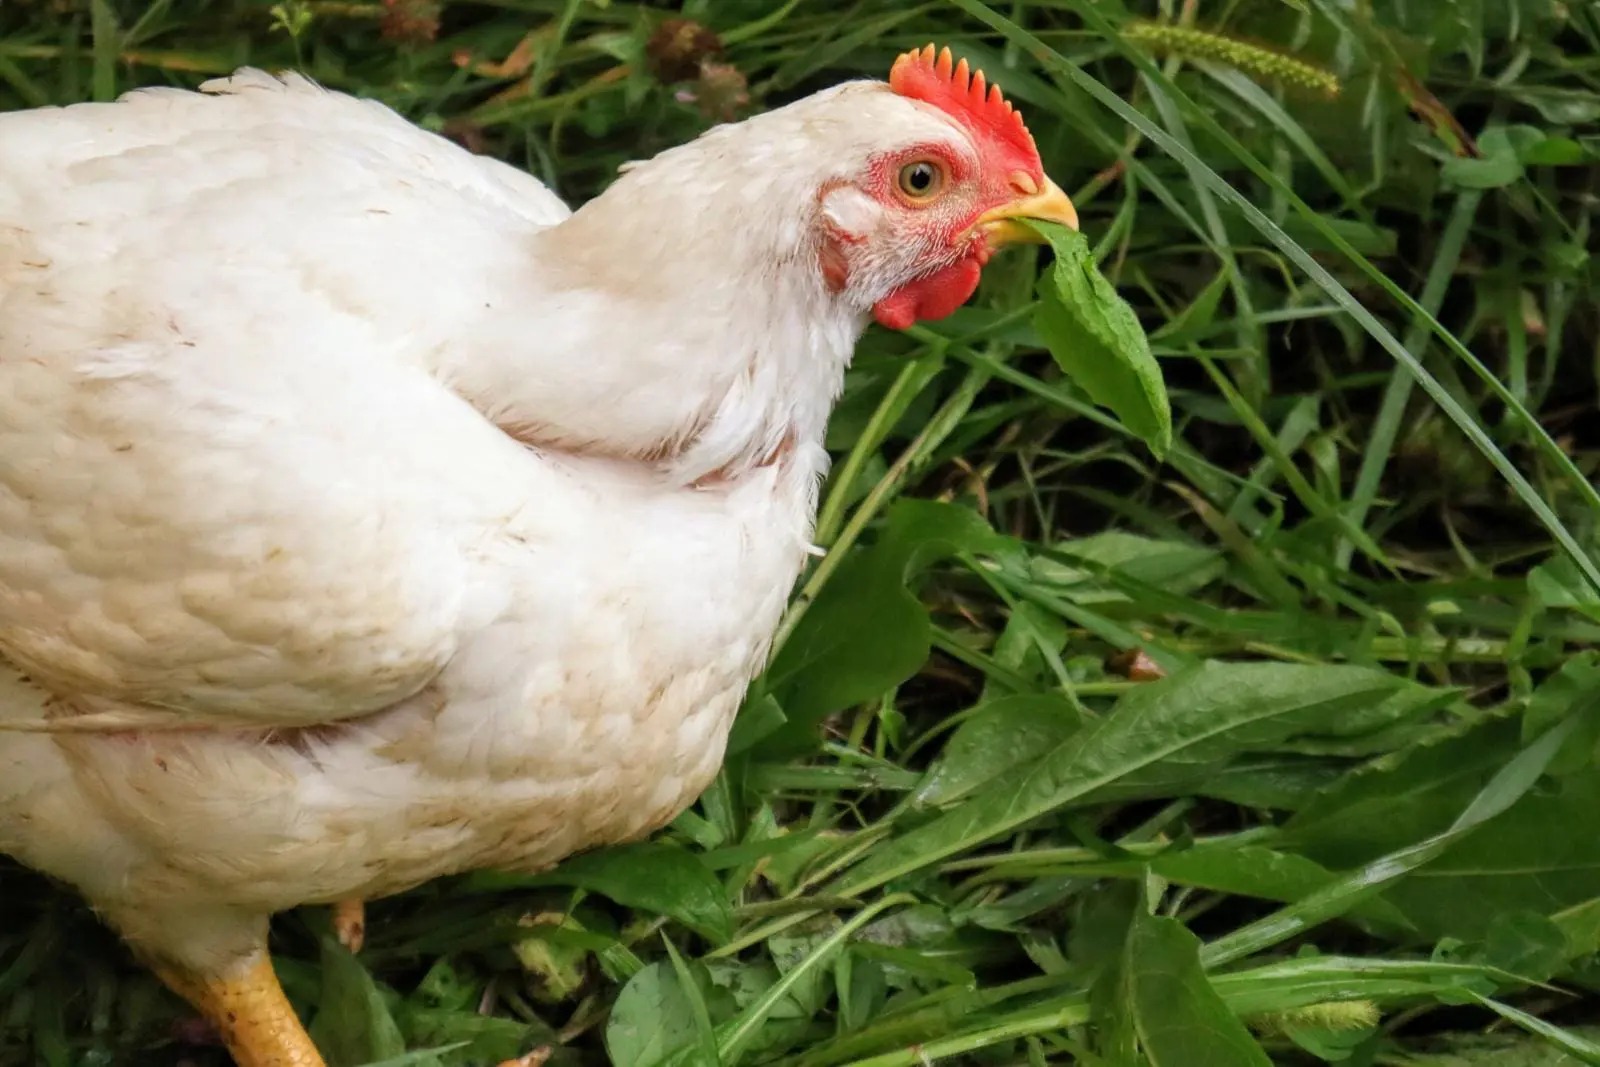 This Chicken’s Surprising Grass-Eating Habit Will Leave You Speechless!